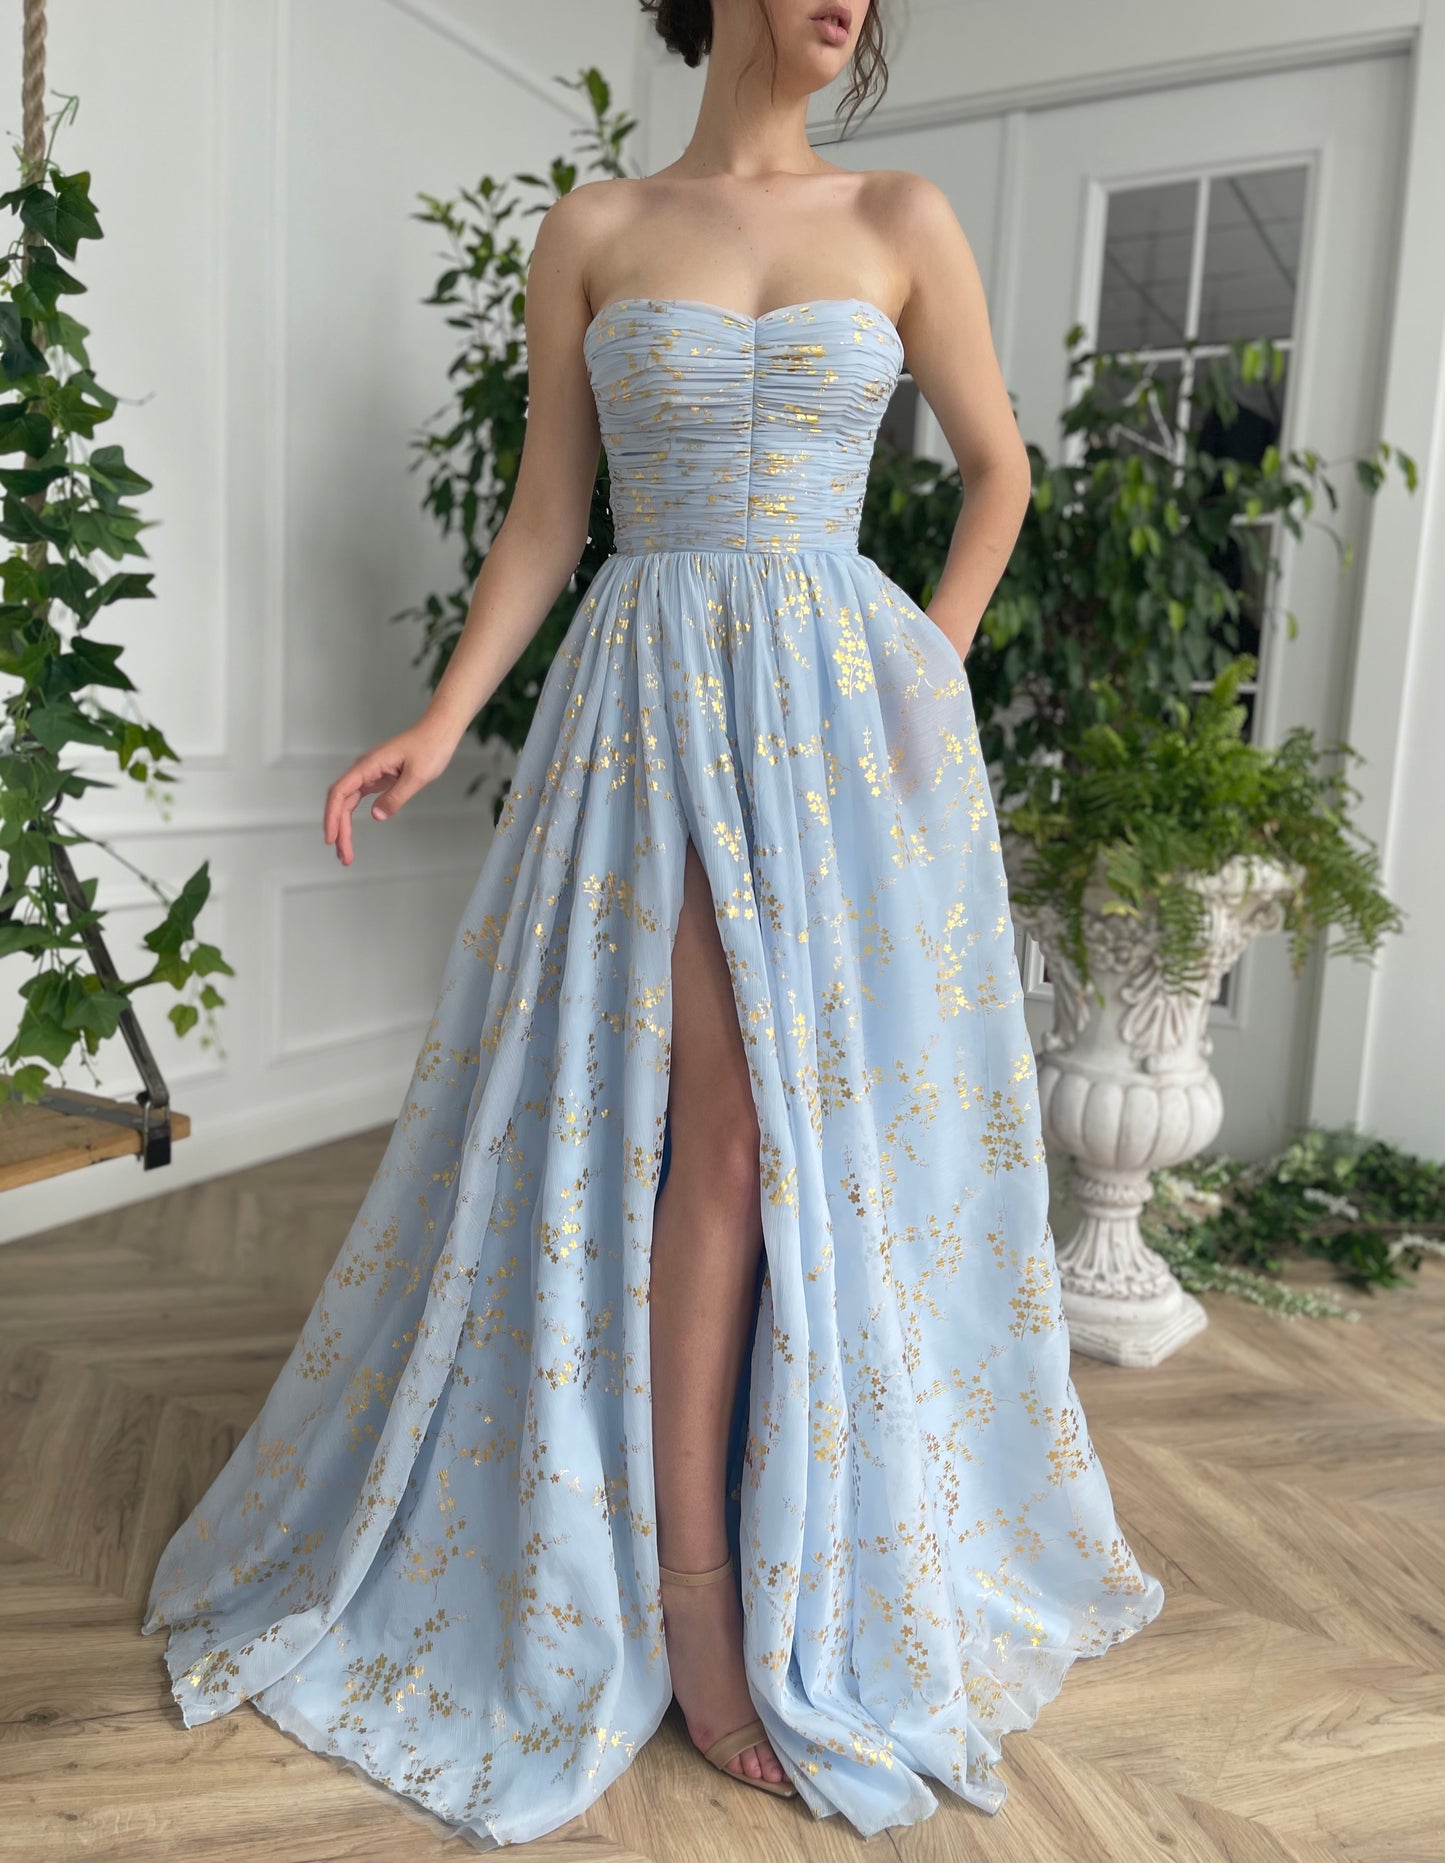 Blue A-Line dress with no sleeves